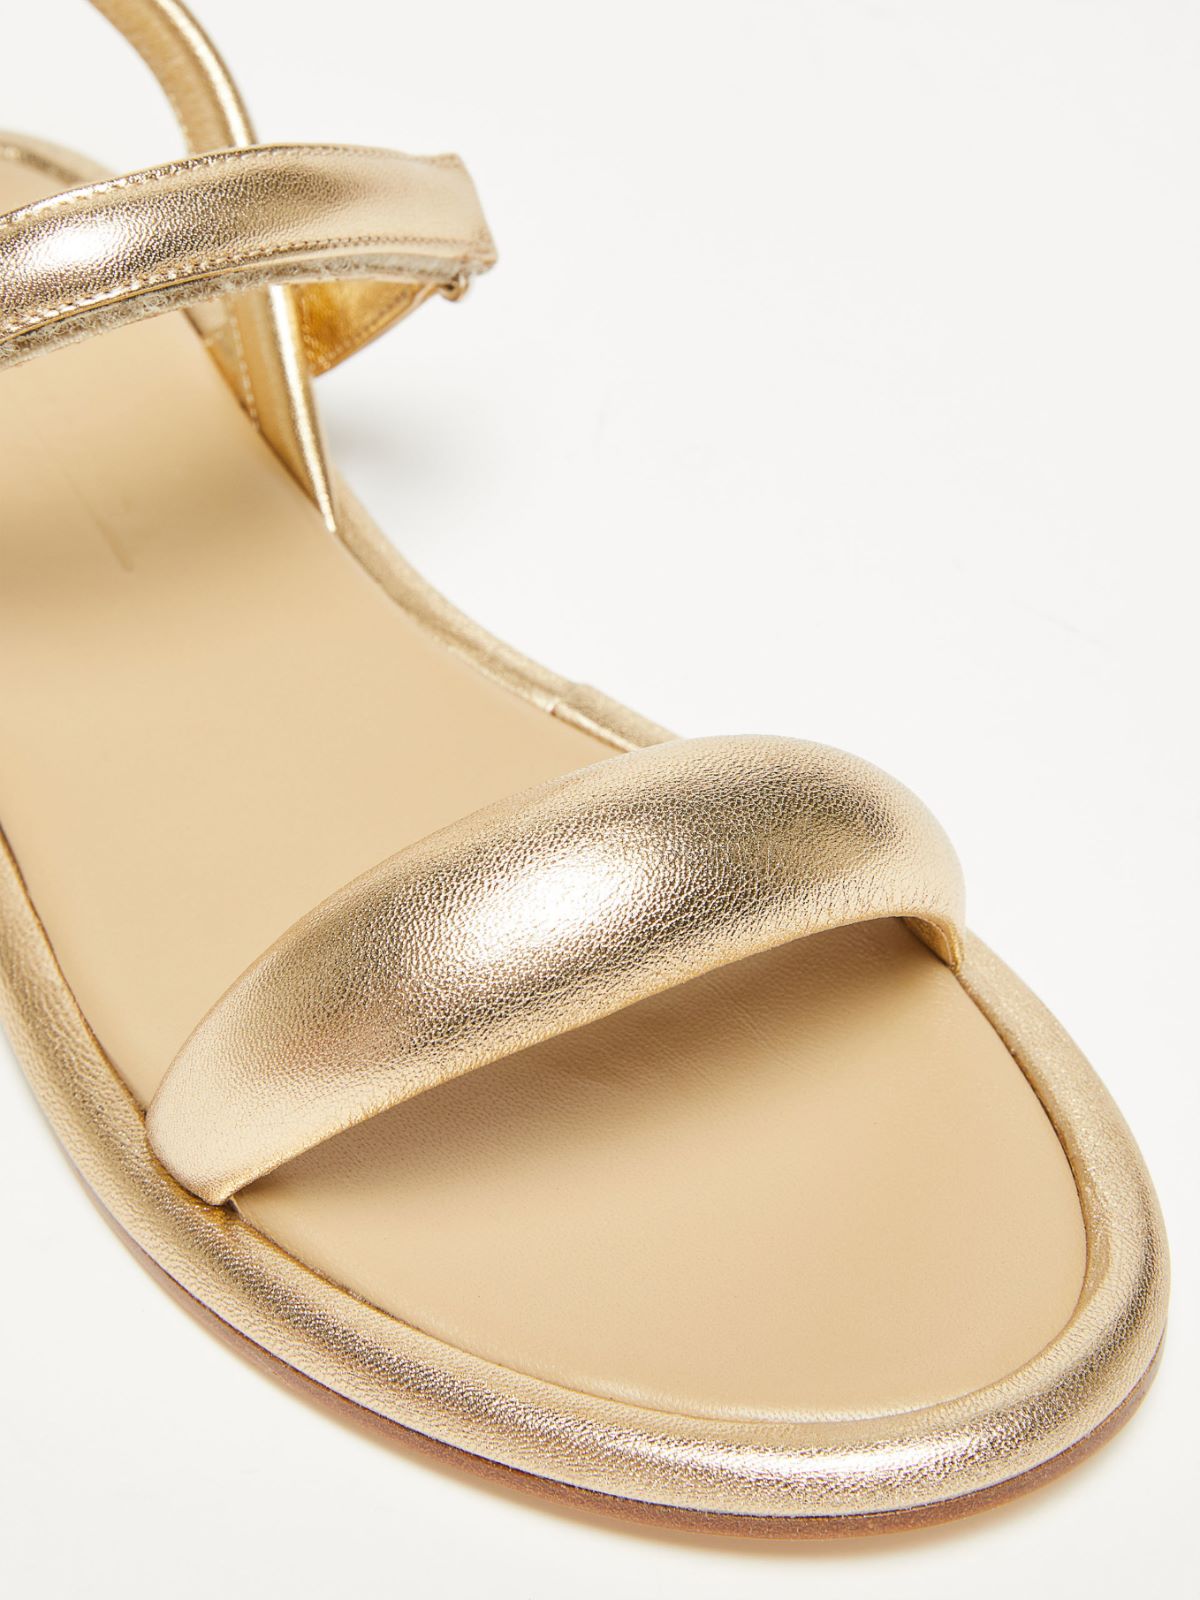 Sandals in nappa leather - GOLD - Weekend Max Mara - 4